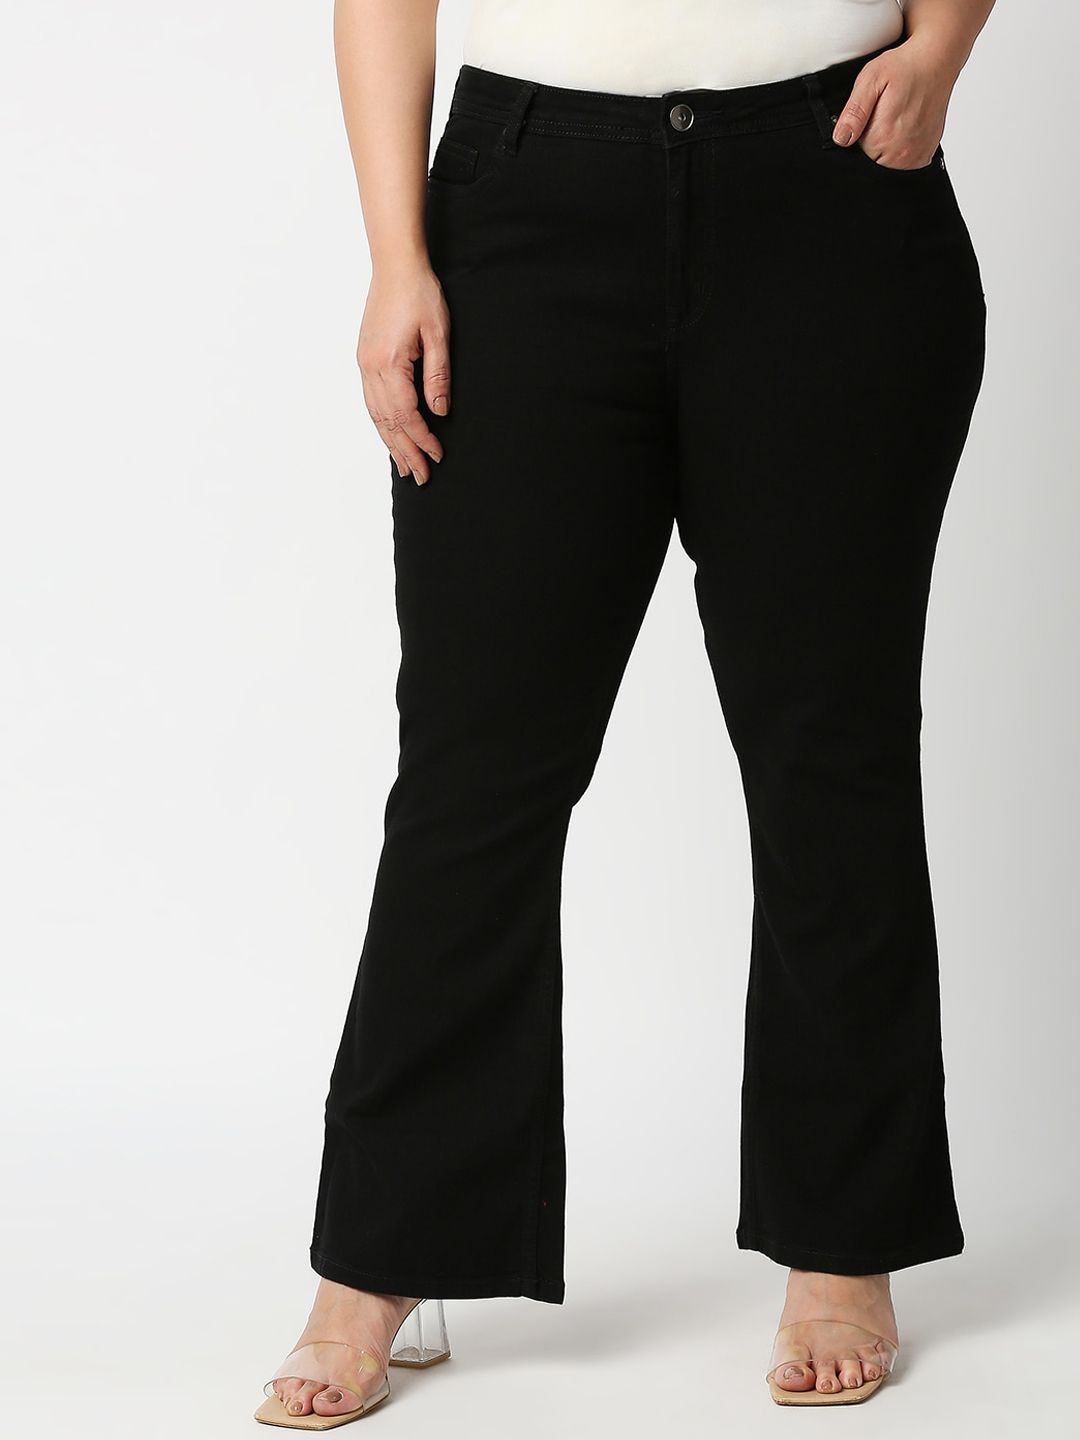 High Star Women Black Plus Size Slim Fit Stretchable Jeans Price in India